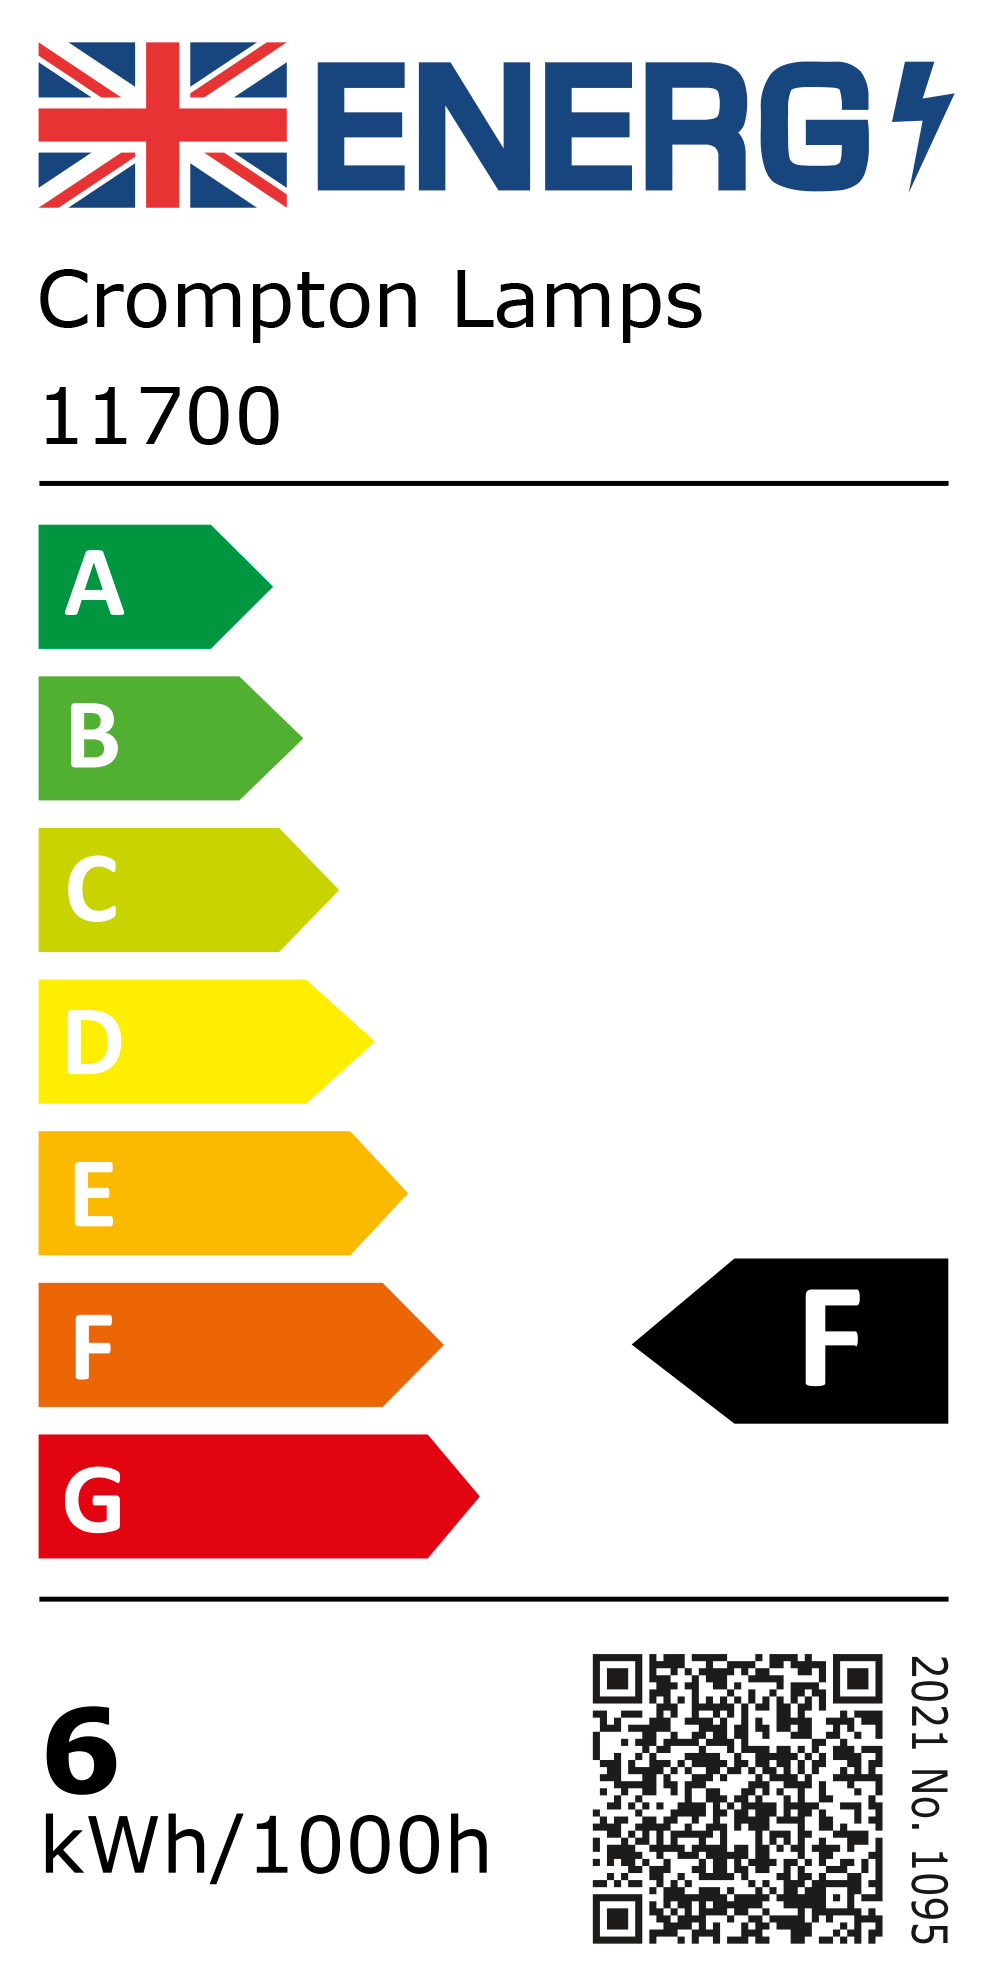 New 2021 Energy Rating Label: Stock Code 11700